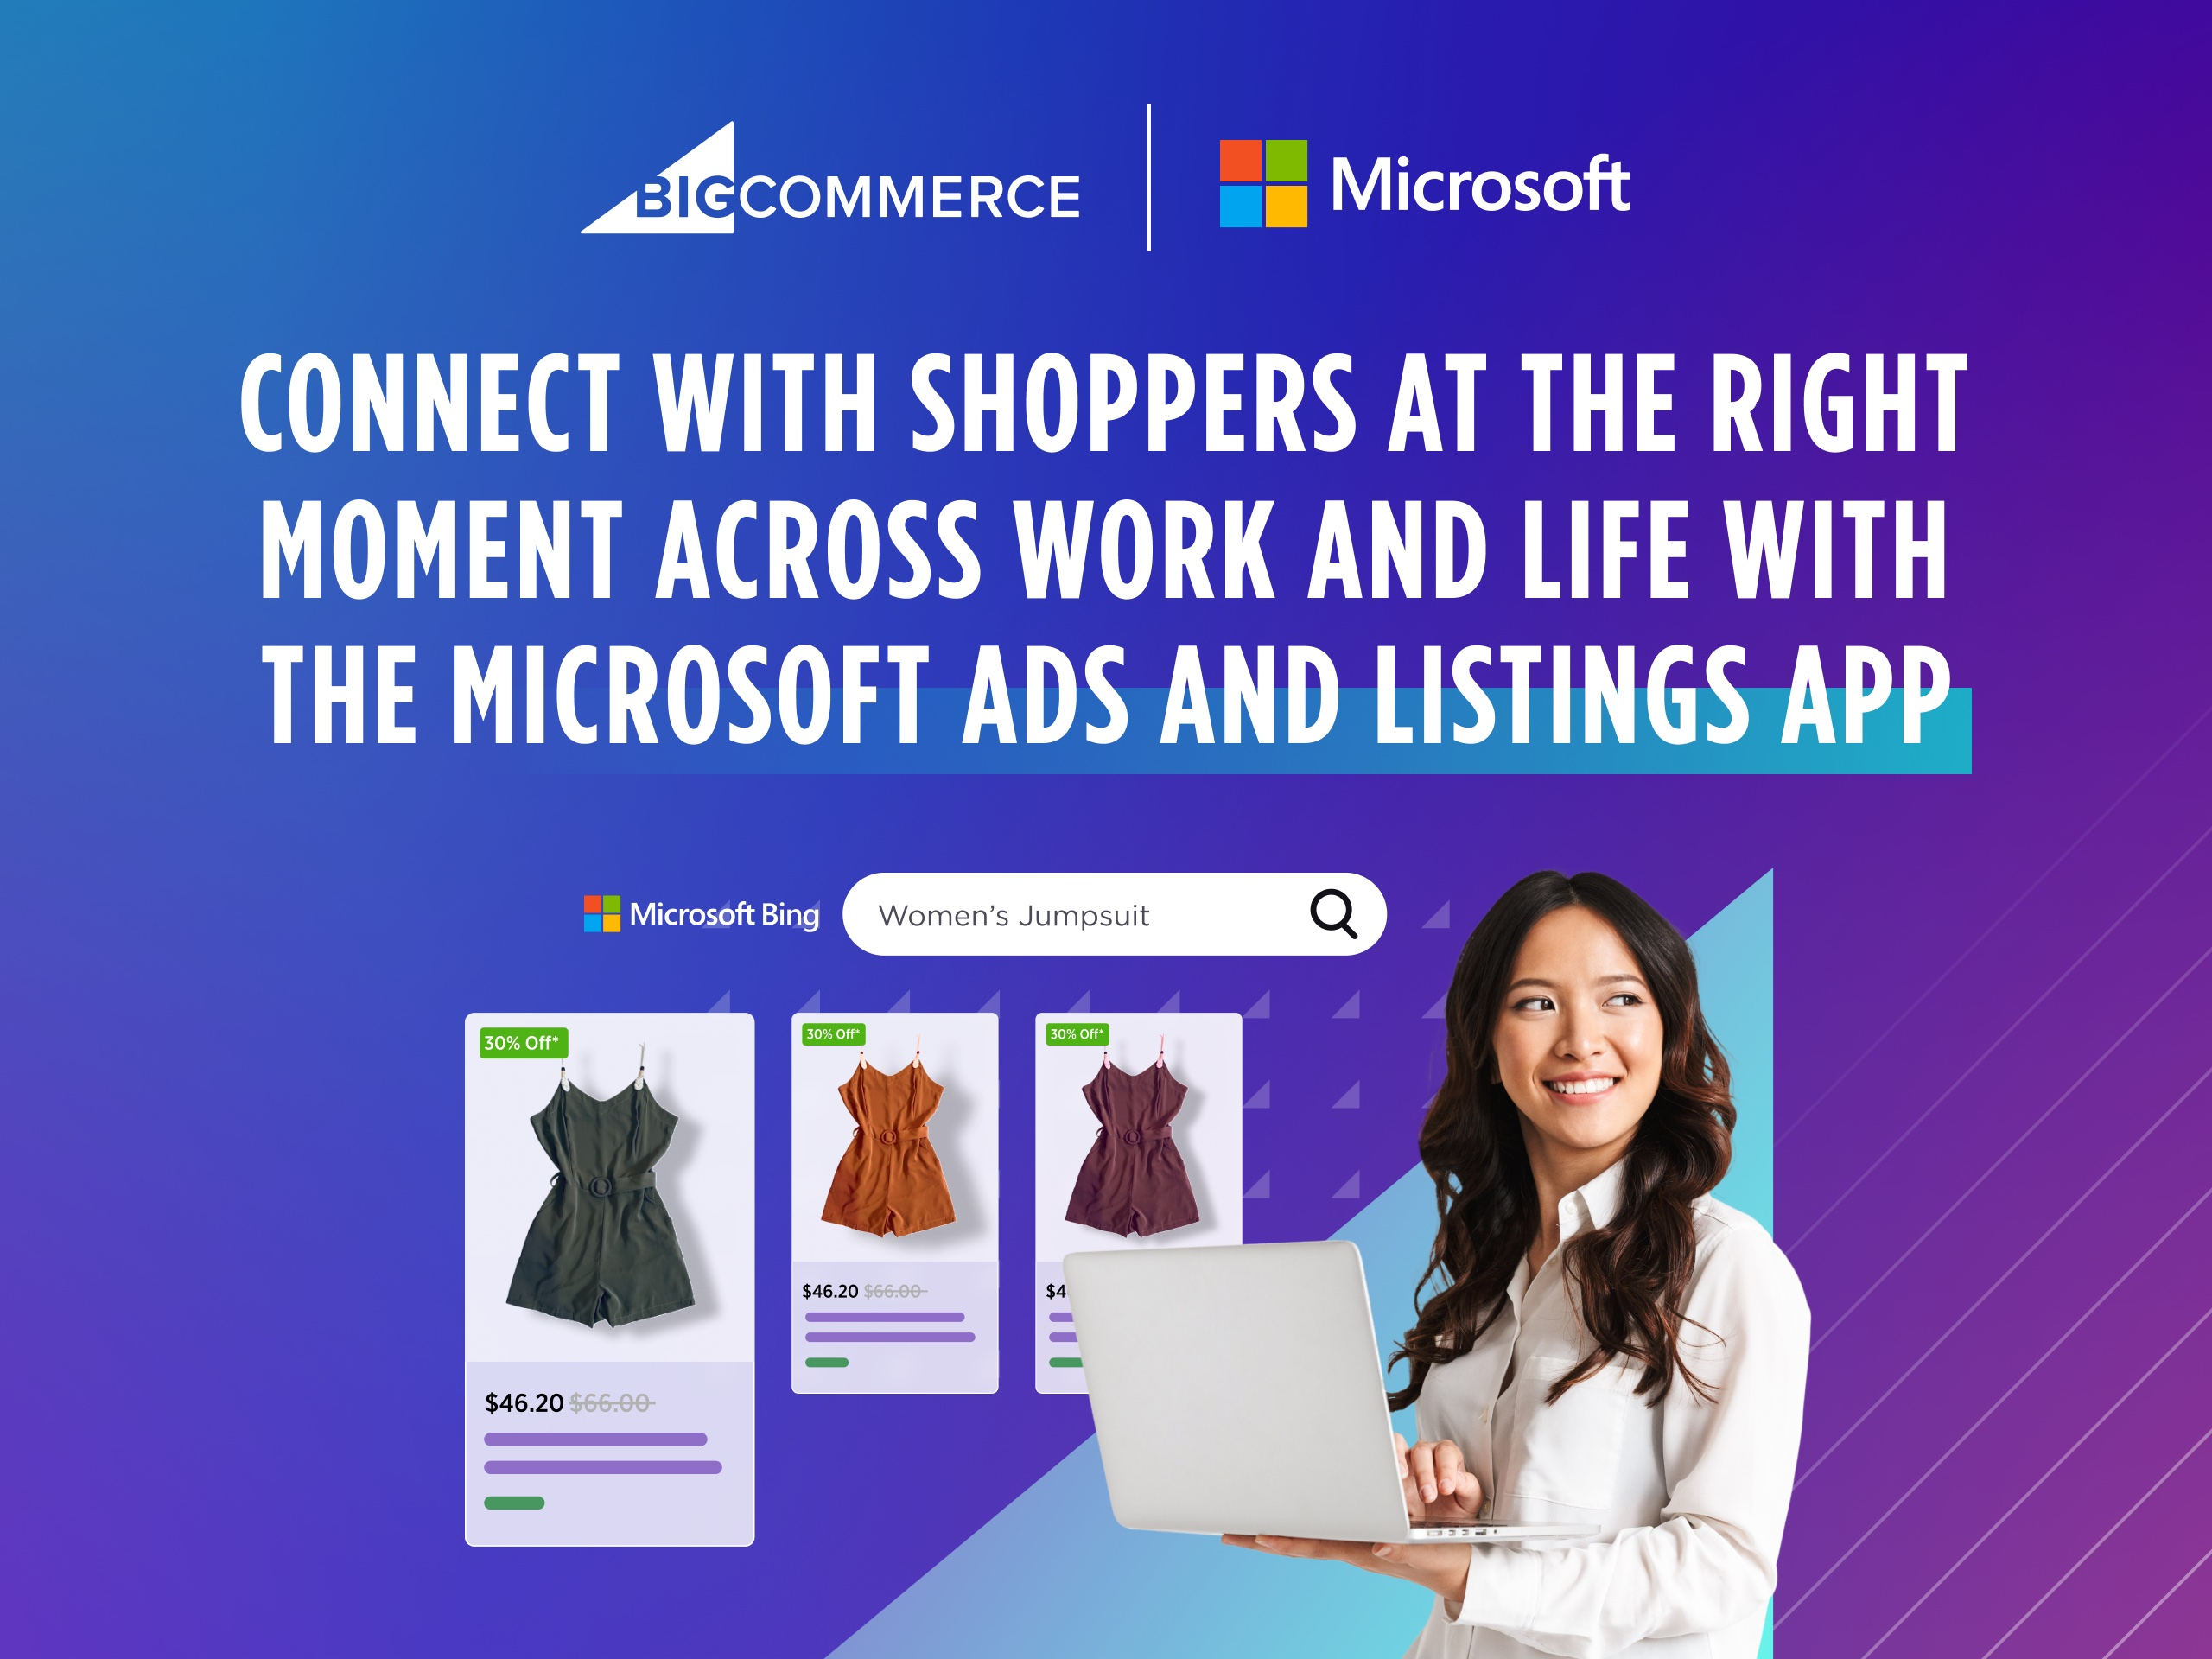 BigCommerce is joining forces with Microsoft Ad Network